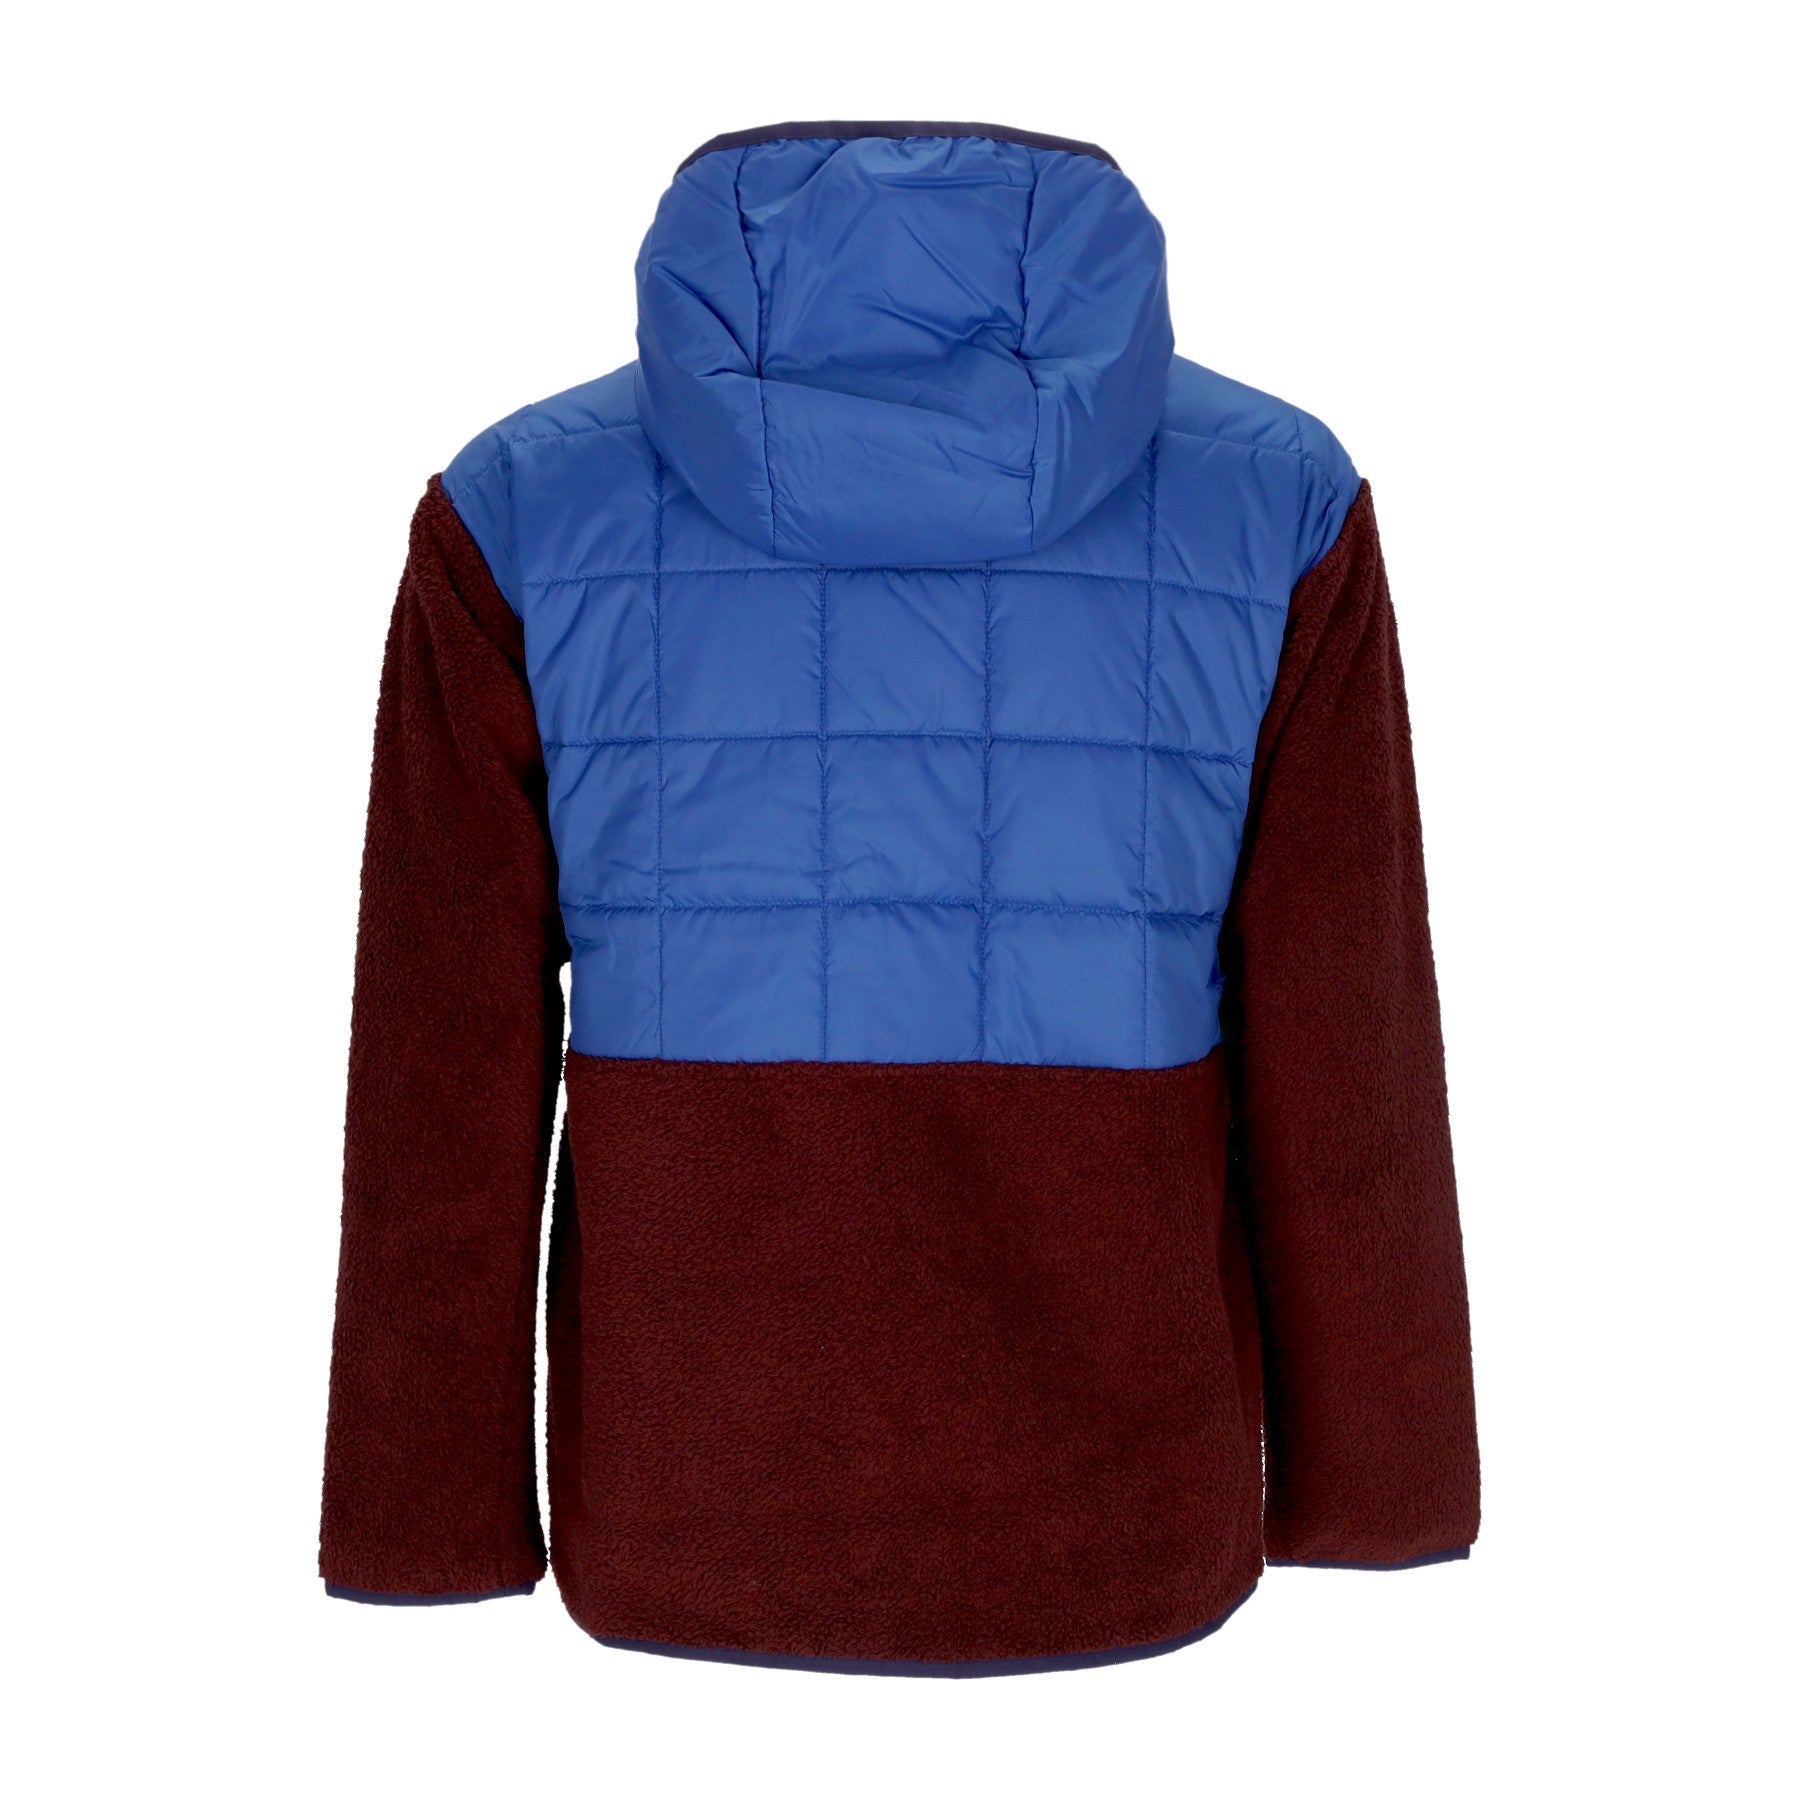 Cotopaxi, Orsetto Uomo Trico Hybrid Hooded Jacket, 